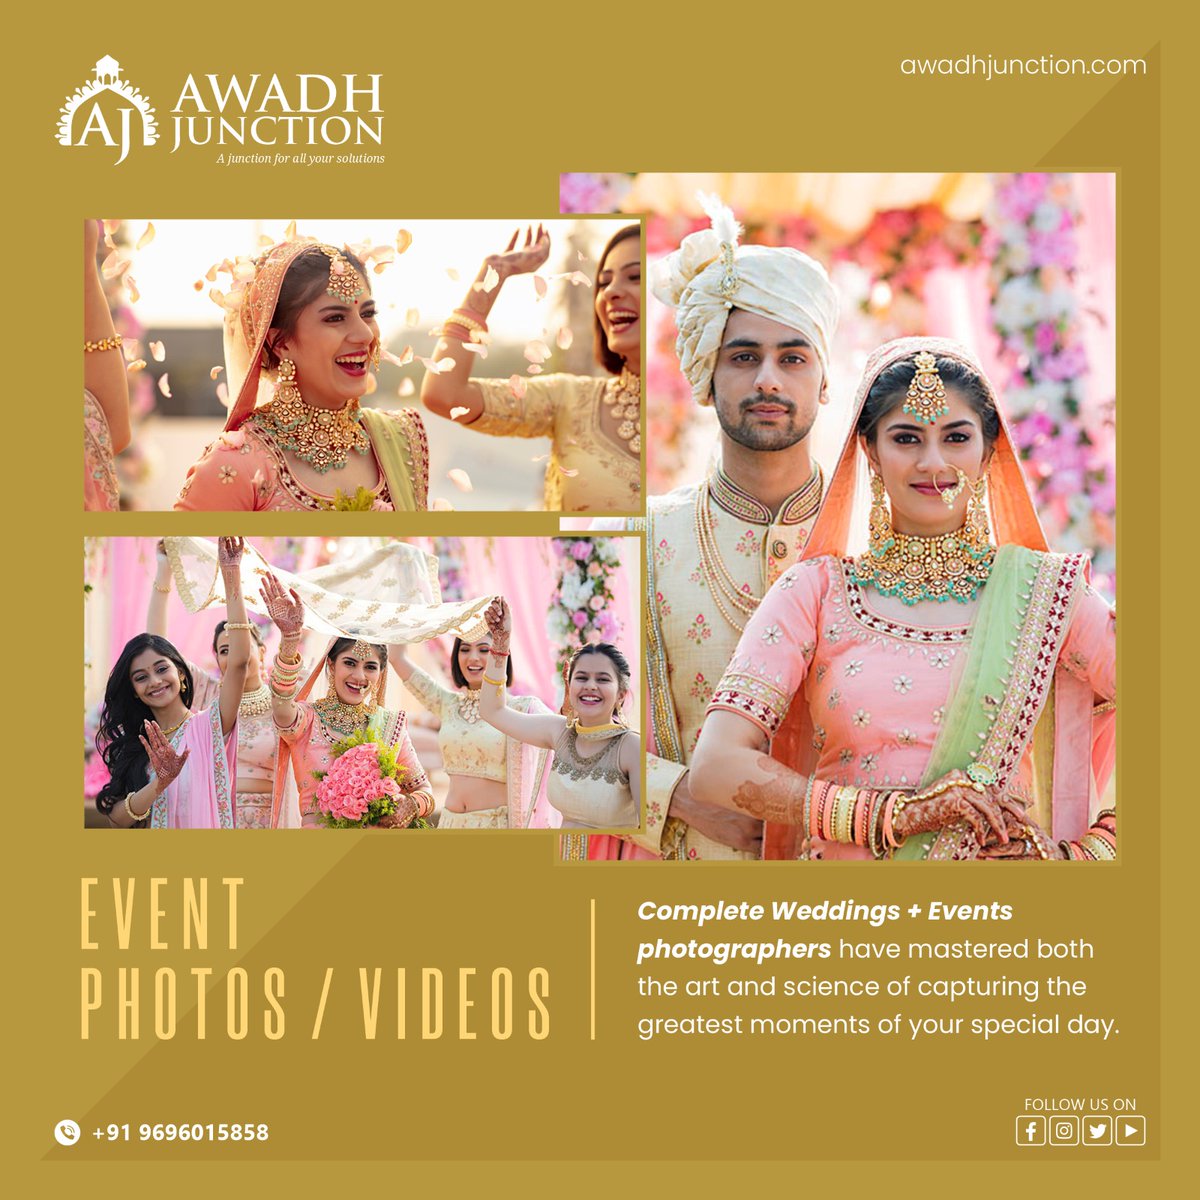 Make your special day more special with @theawadhjunction 💖

Follow👉🏻@theawadhjunction for more updates✅
.
.
DM @theawadhjunction 
Call now- +91 9696015858
.
.
#theawadhjunction #events #eventmanagement #lucknowevents #weddingplanner #decor #weddingdecor #eventphotographers